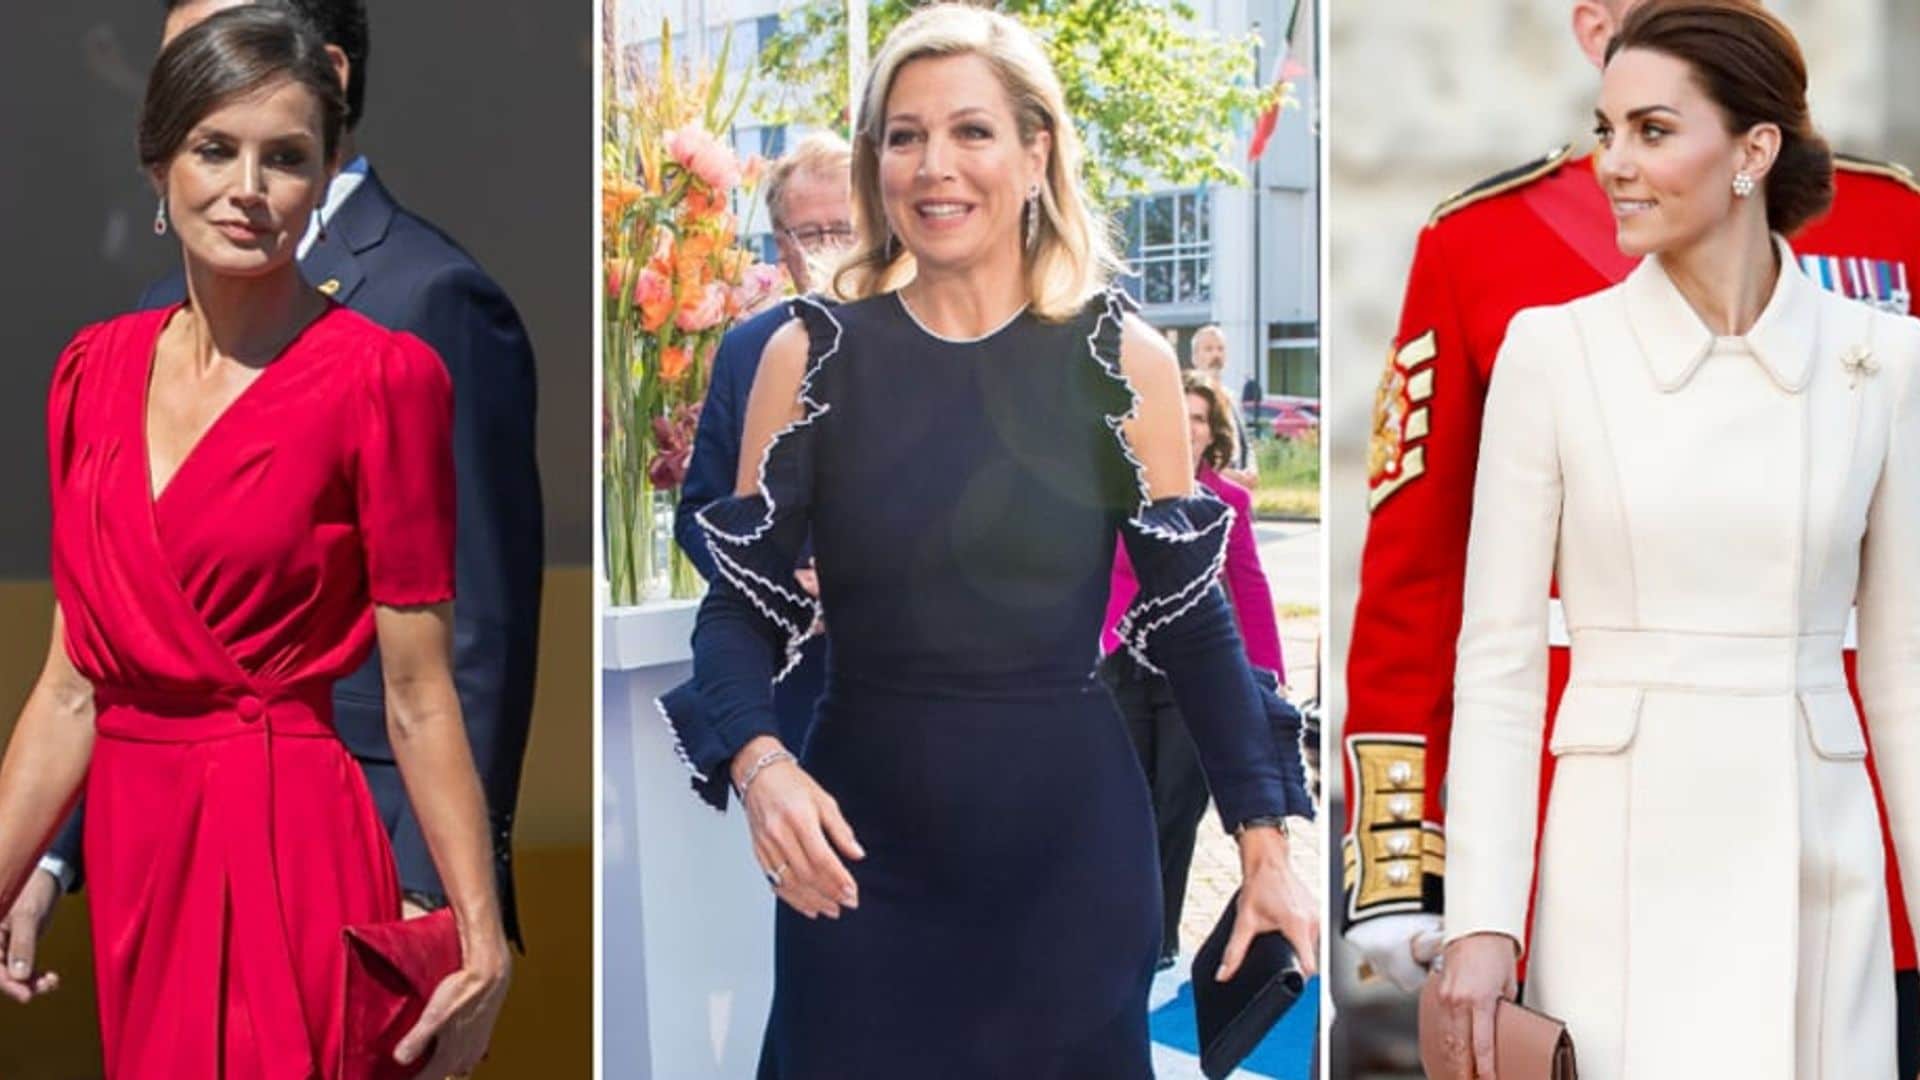 Regal Elegance: Kate Middleton, Queen Letizia and more royal fashionistas with fab style